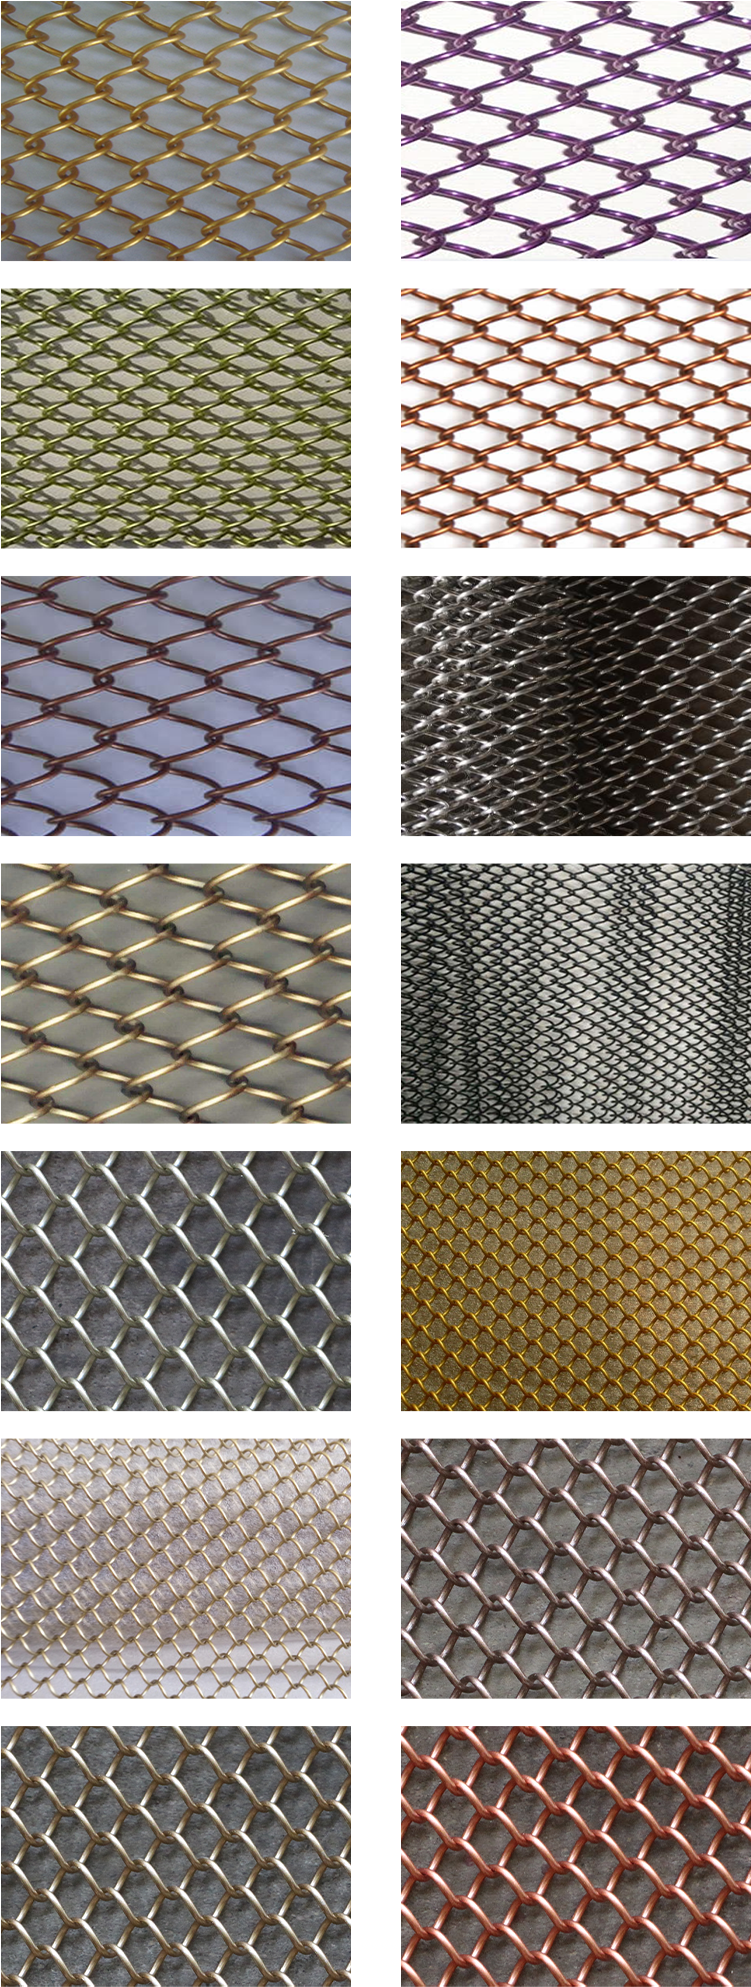 A Collage Of Different Types Of Metal Mesh